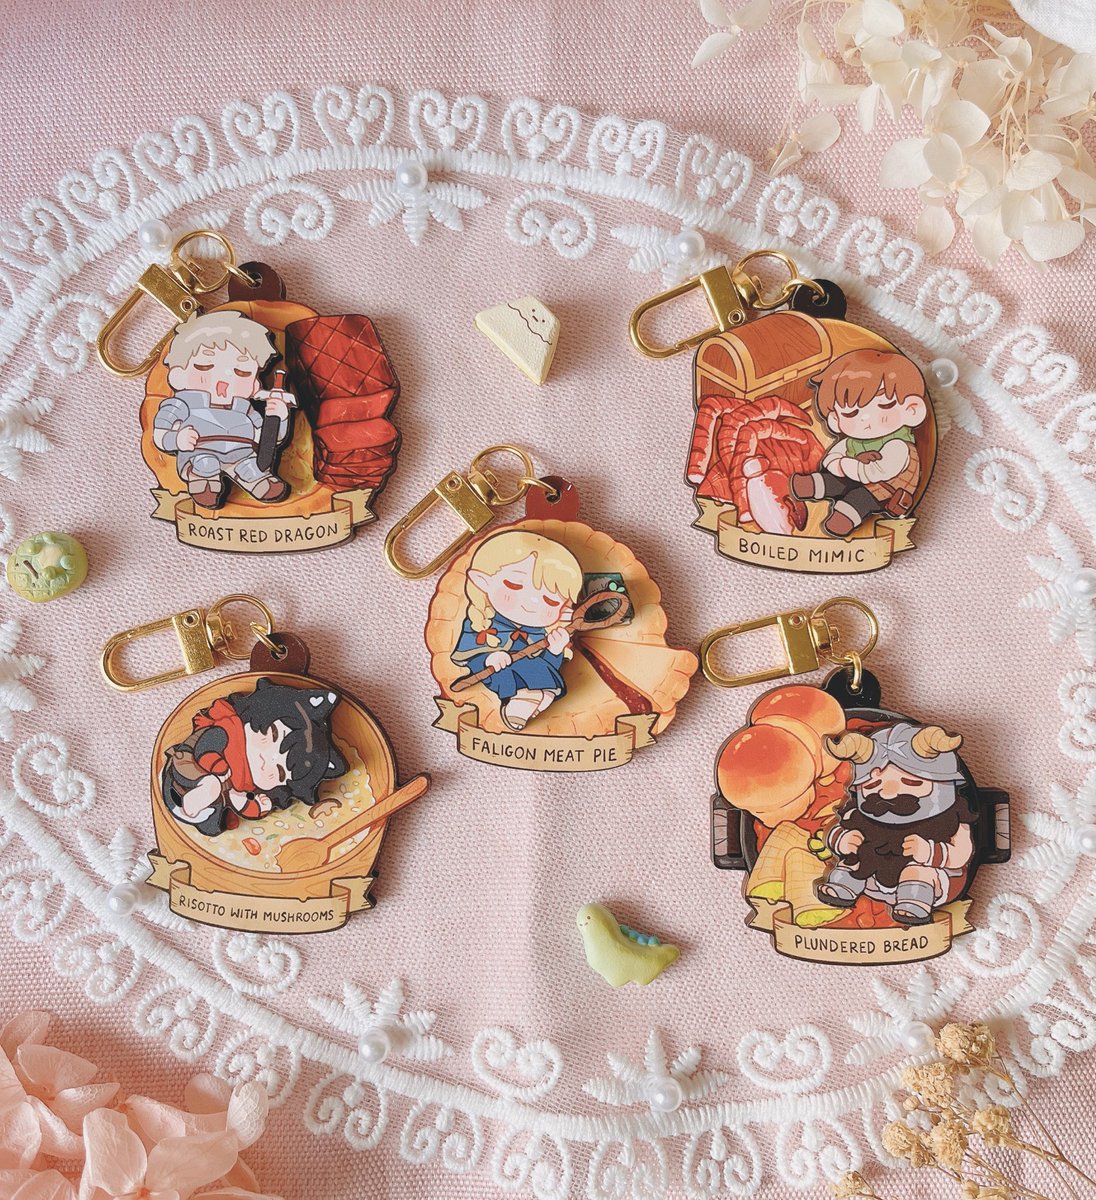 Food Coma wooden charms!! #dungeonmeshi